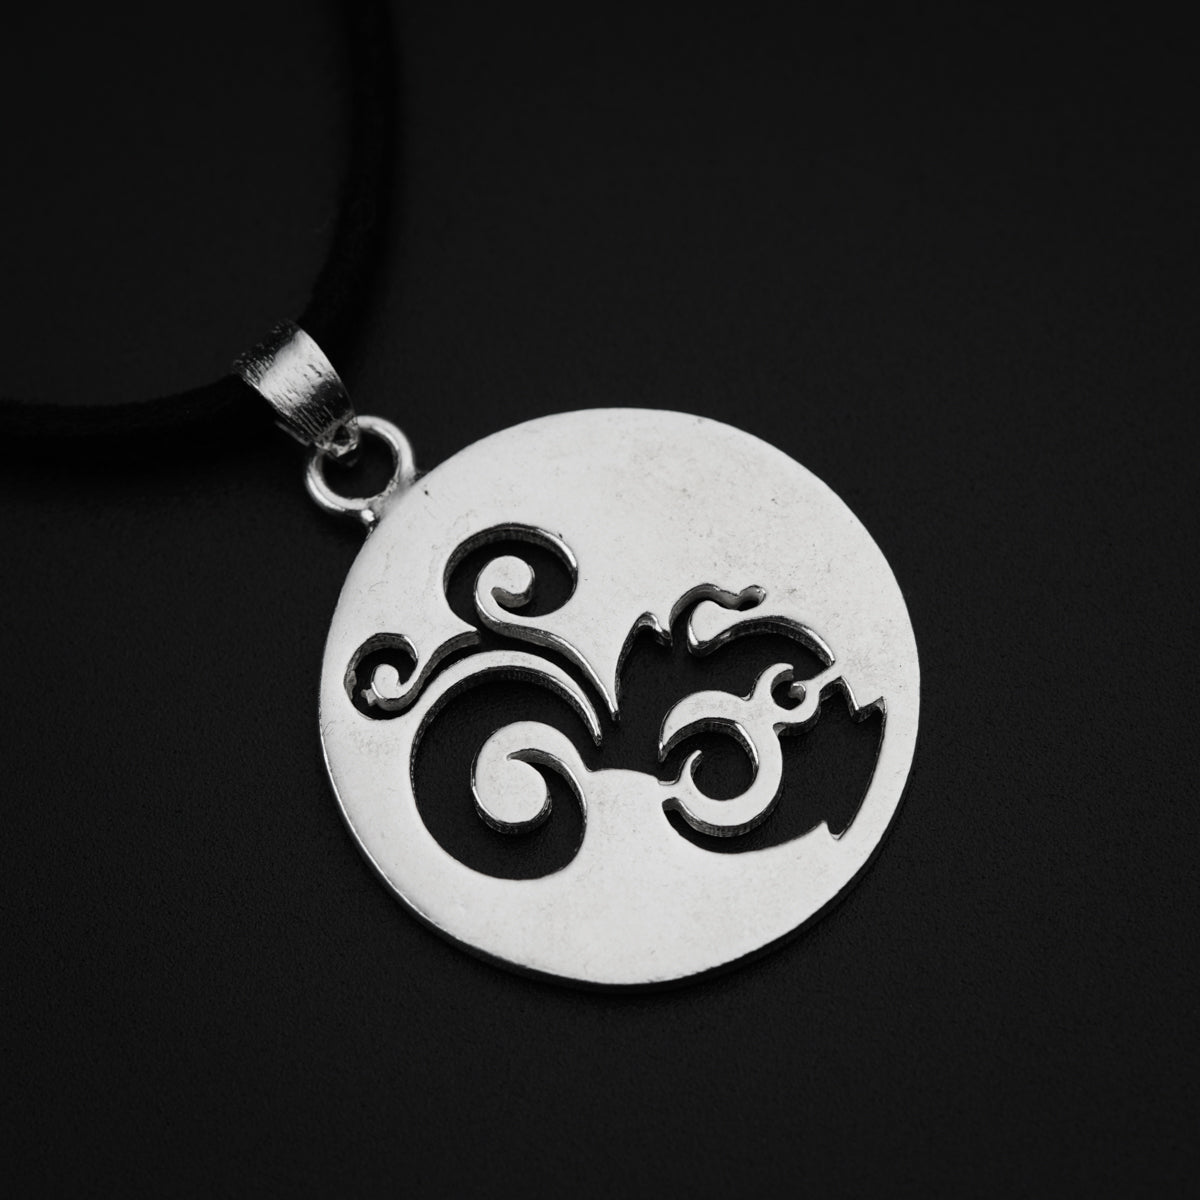 a pendant with a black and white design on it